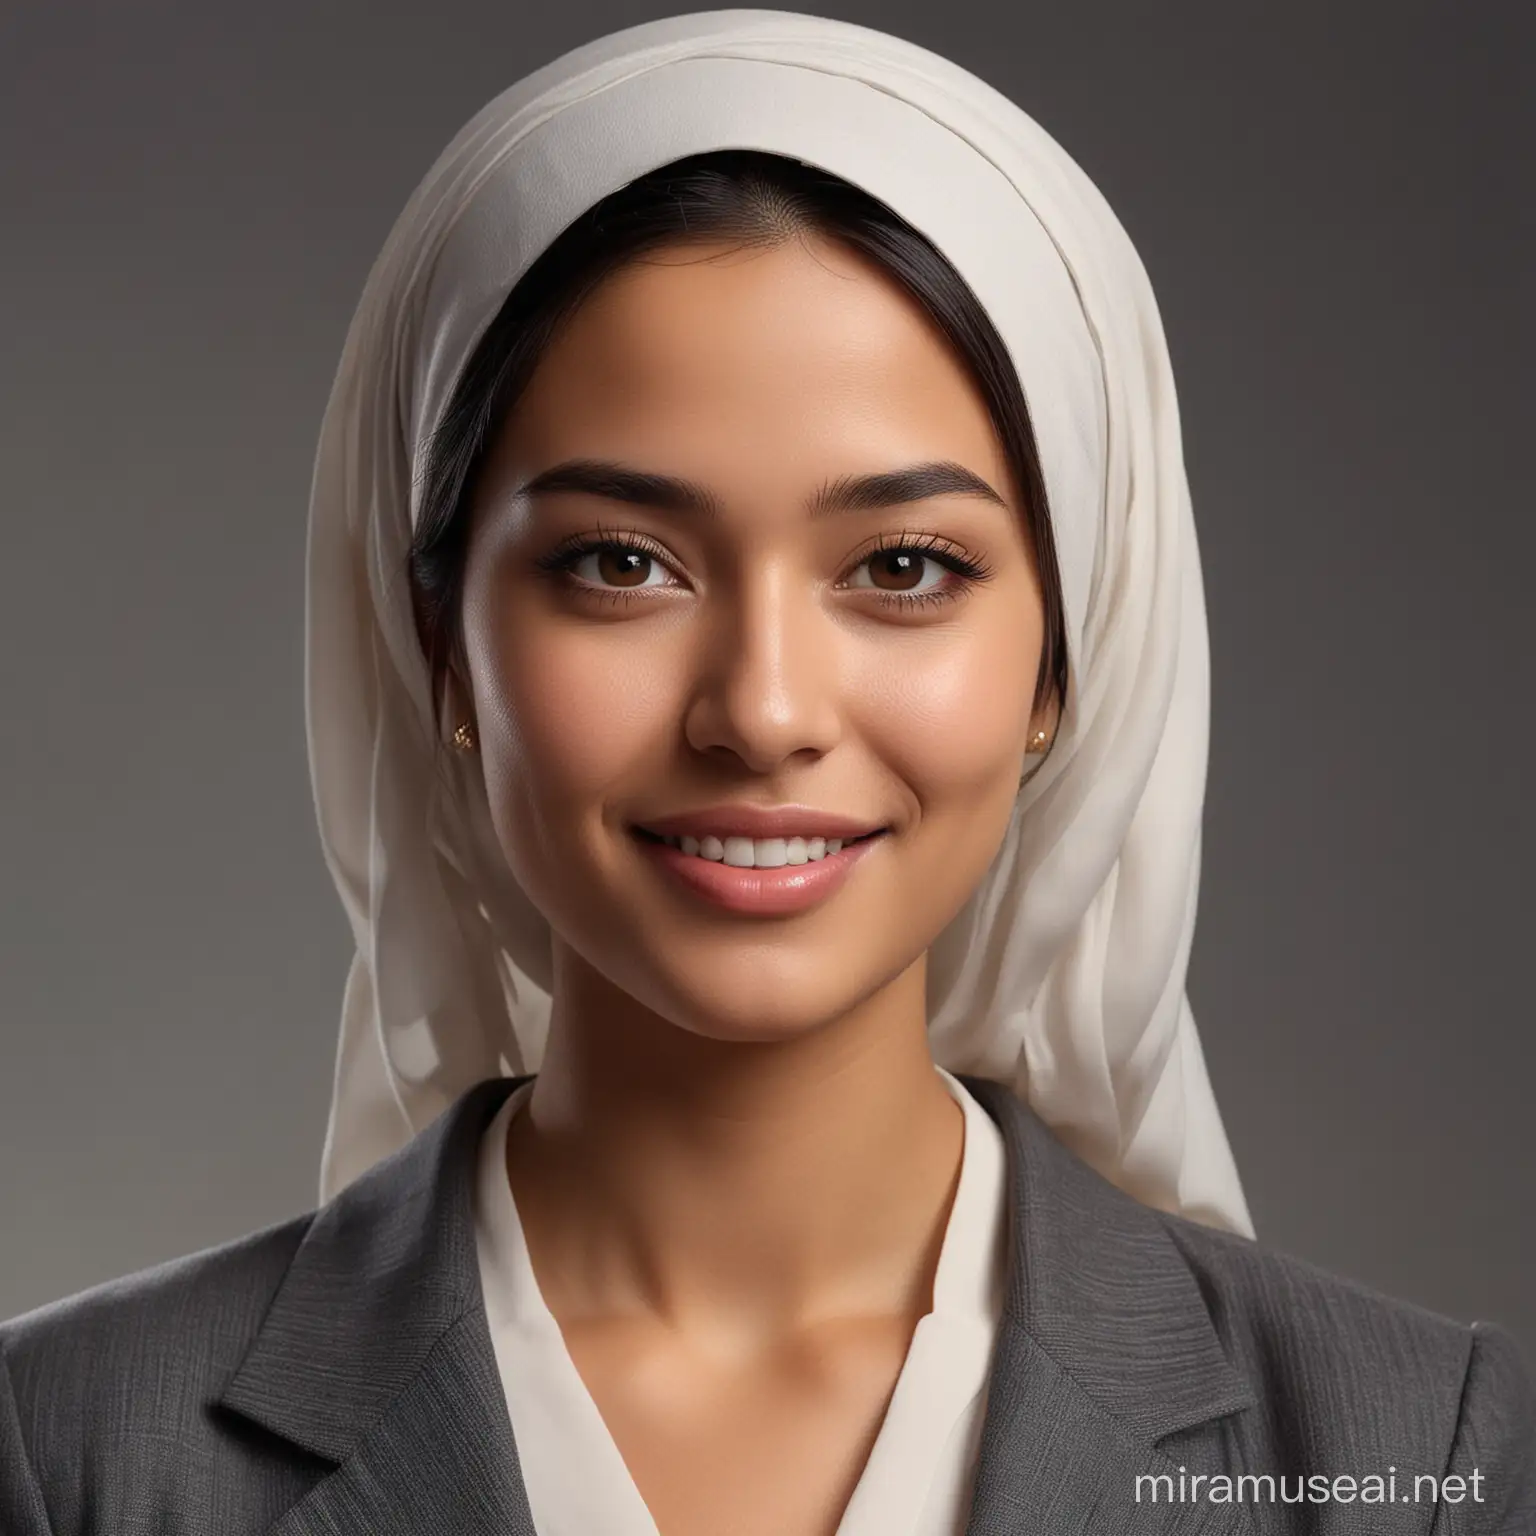 8K photorealistic Image of a young Malay woman with fair skin, wearing a Muslim Hijab covering all her hair. She has a slender face with high cheekbones and full lips. Her smiling eyes are large and expressive, with dark irises, framed by neatly shaped eyebrows. The woman is wearing a light-colored, probably white, button-up shirt underneath a tailored gray blazer. The blazer is well-fitted, accentuating her shoulders and waist. She wears minimal jewelry: a delicate necklace with what appears to be a small charm and simple hoop earrings. The lighting in the image is soft and diffused, creating a gentle glow on her face and a subtle interplay of light and shadow that gives her skin a luminous quality. Background is simple and dark, providing a contrast that highlights her silhouette. Her pose is relaxed yet confident, with one hand likely resting out of sight and her torso turned towards the camera. Her expression is serene and approachable, with a hint of a smile on her lips